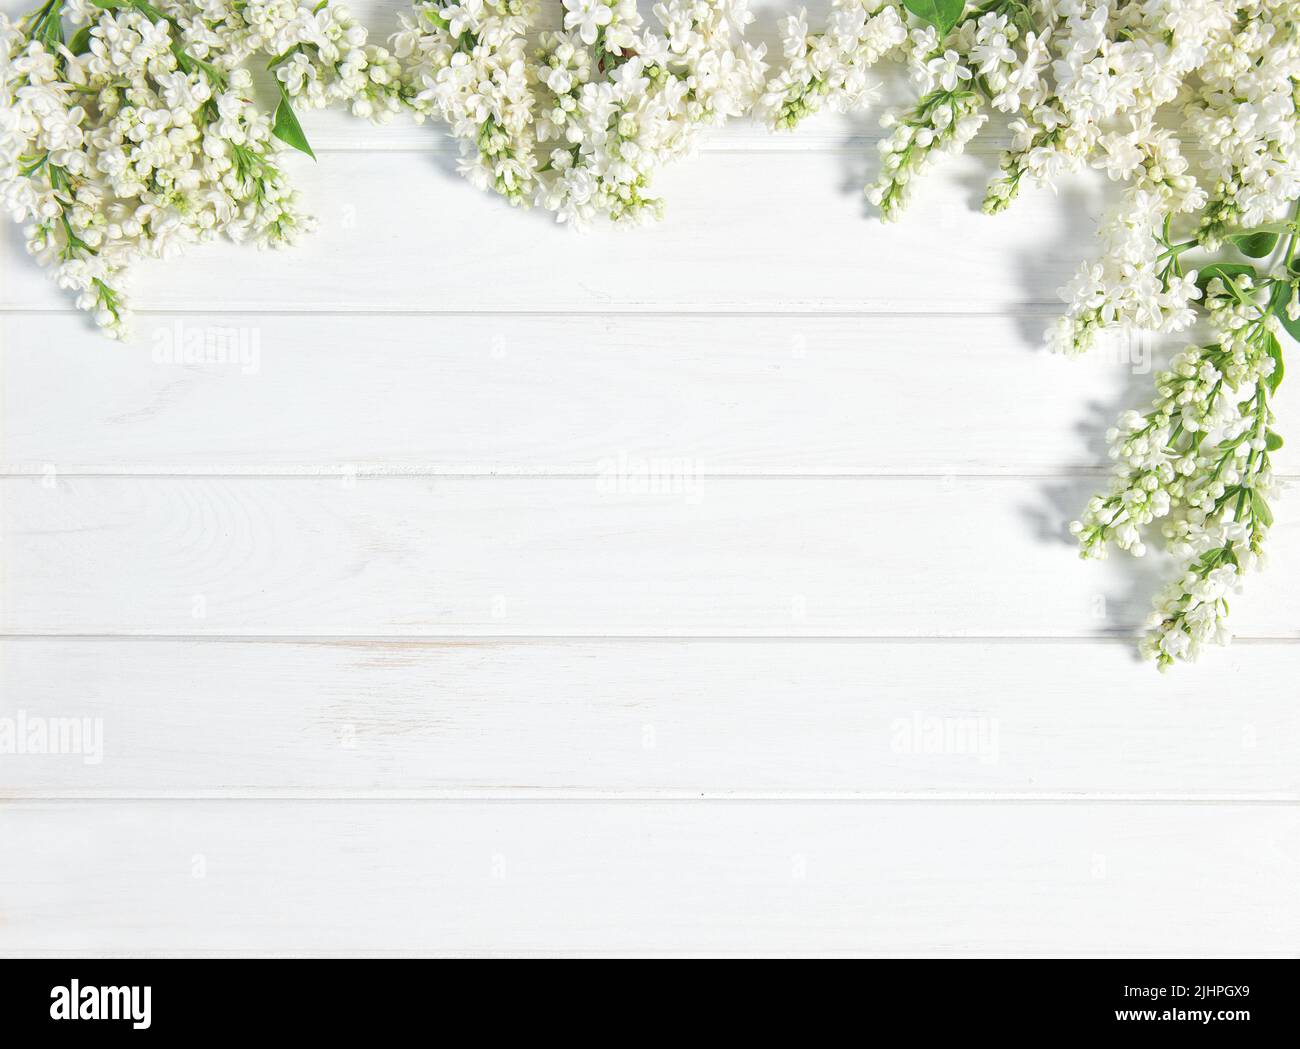 White lilac flowers on white washed wooden background Stock Photo